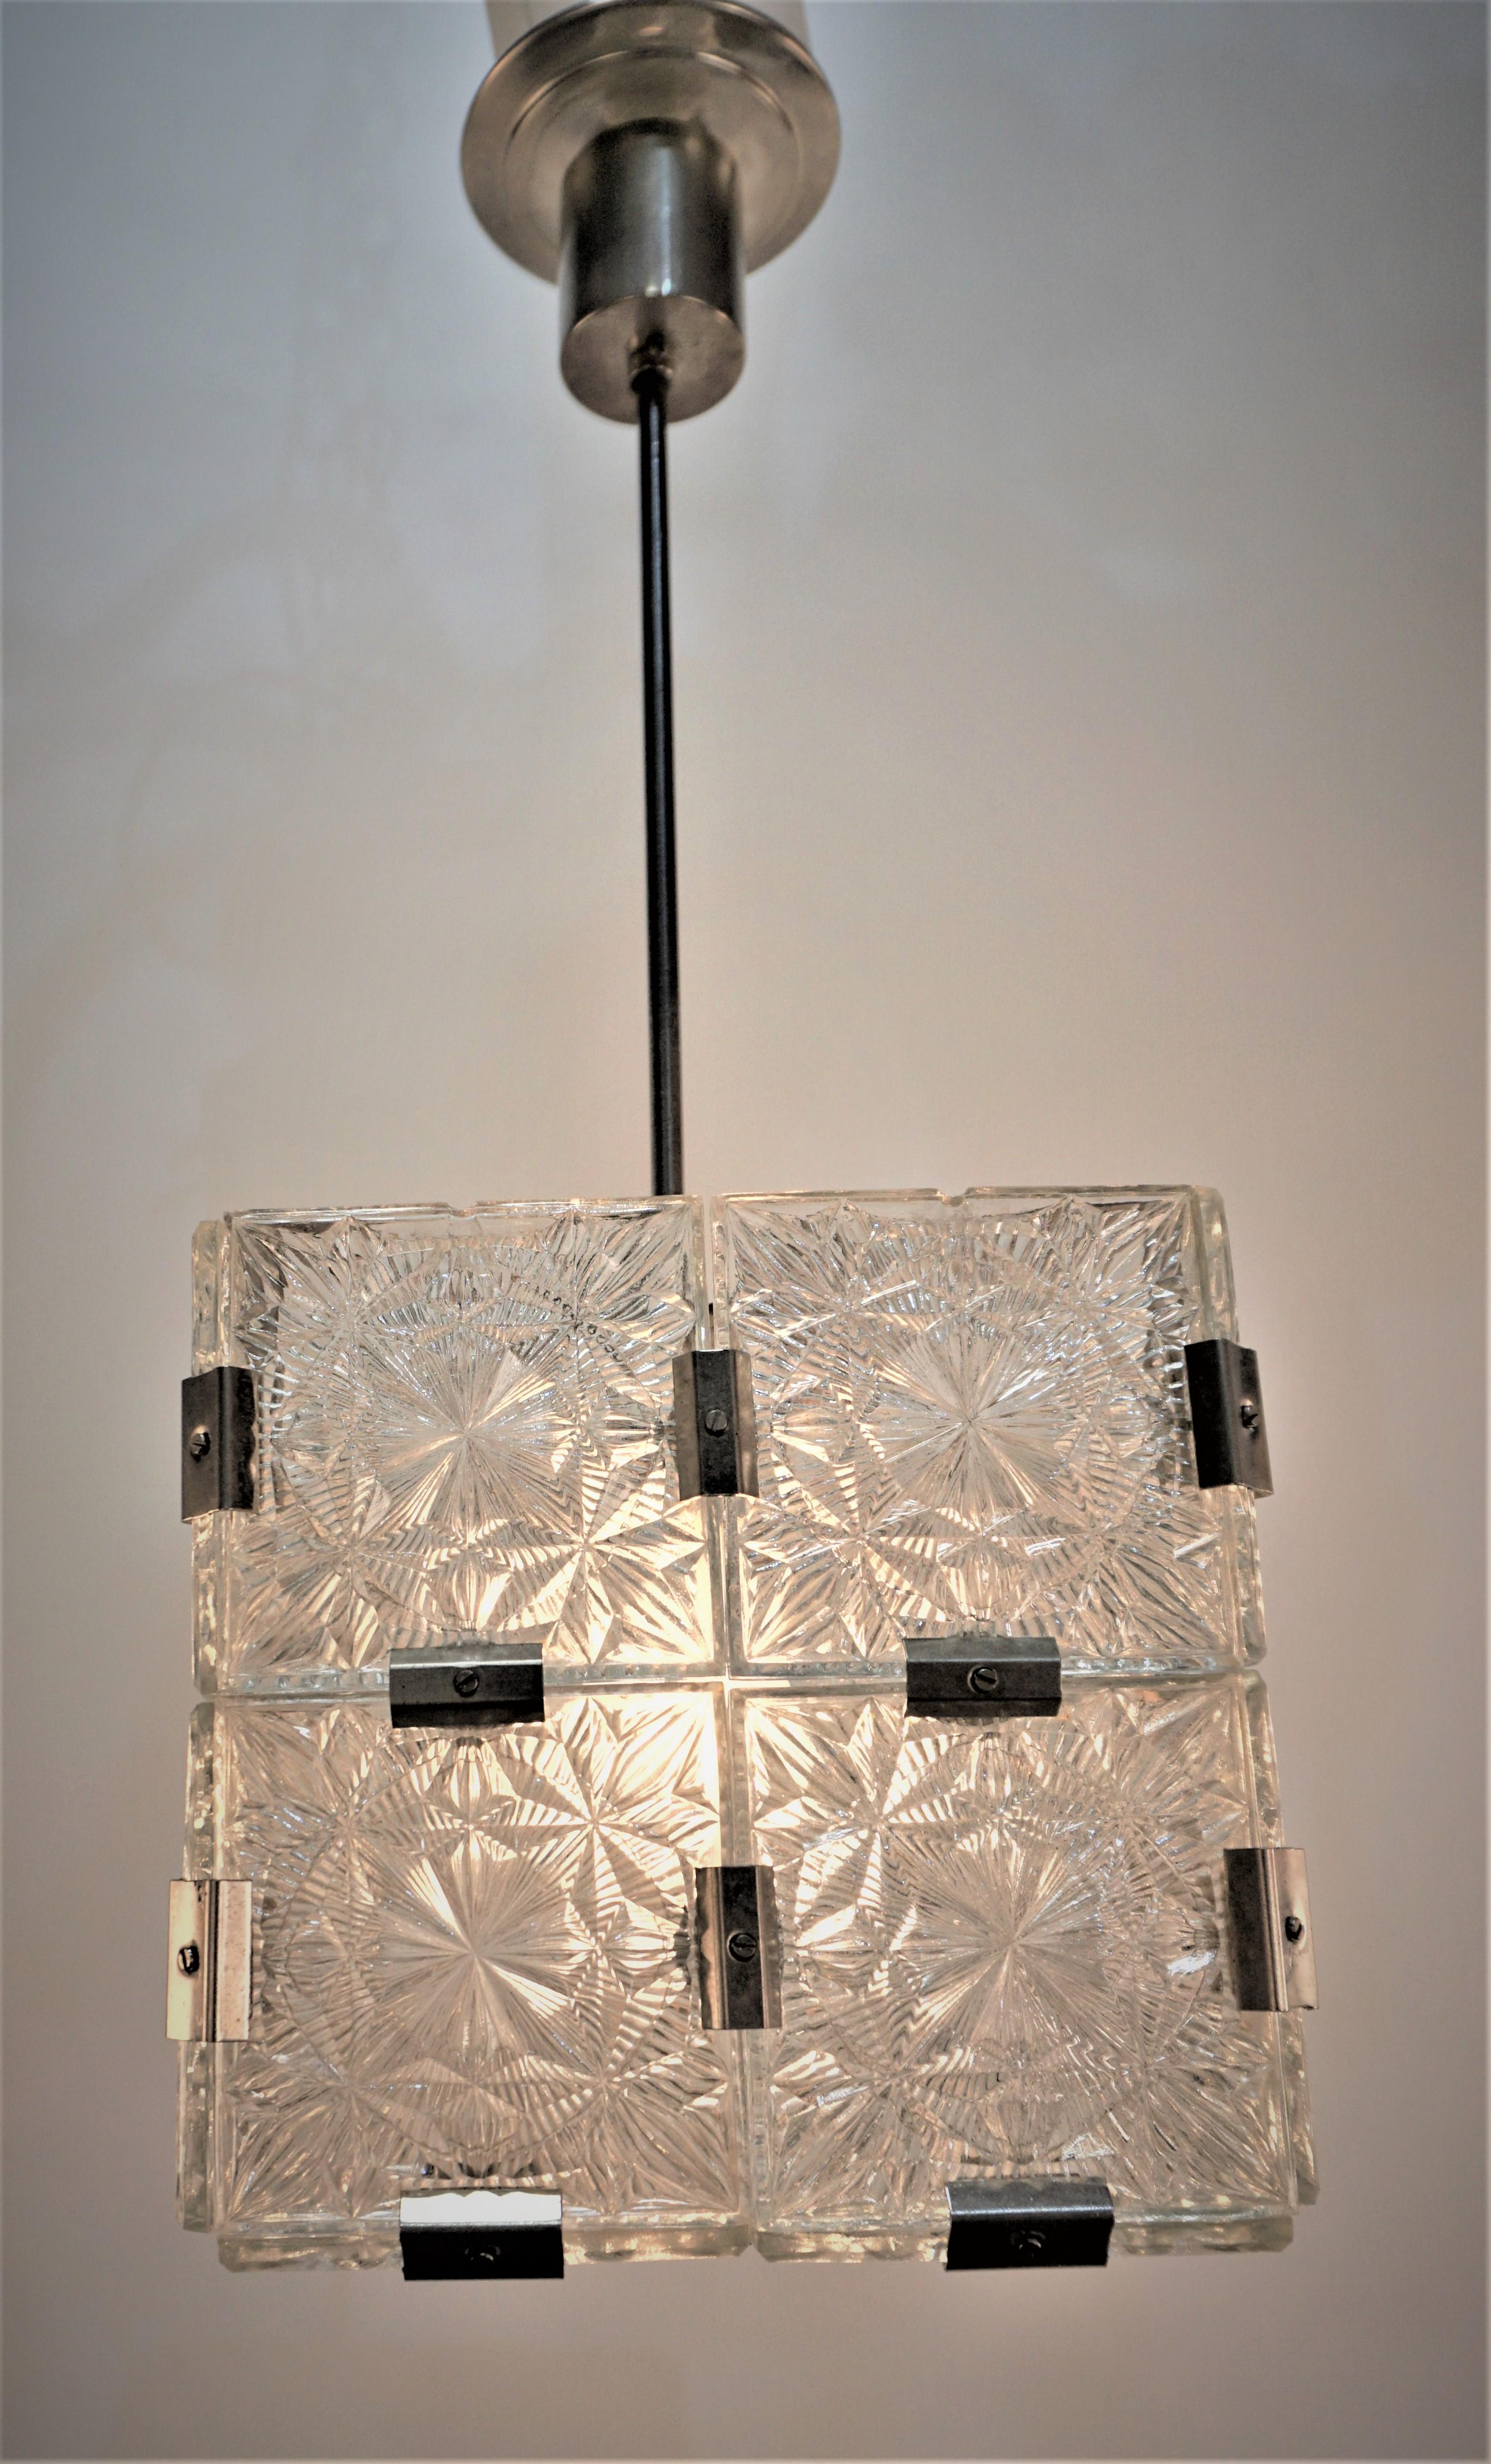 A wonderful modern clear prismatic 1960s Bohemian Kamenicky Senov glass pendant chandelier with 20 pieces of heavy molded square glass and nickel finish hardware. 